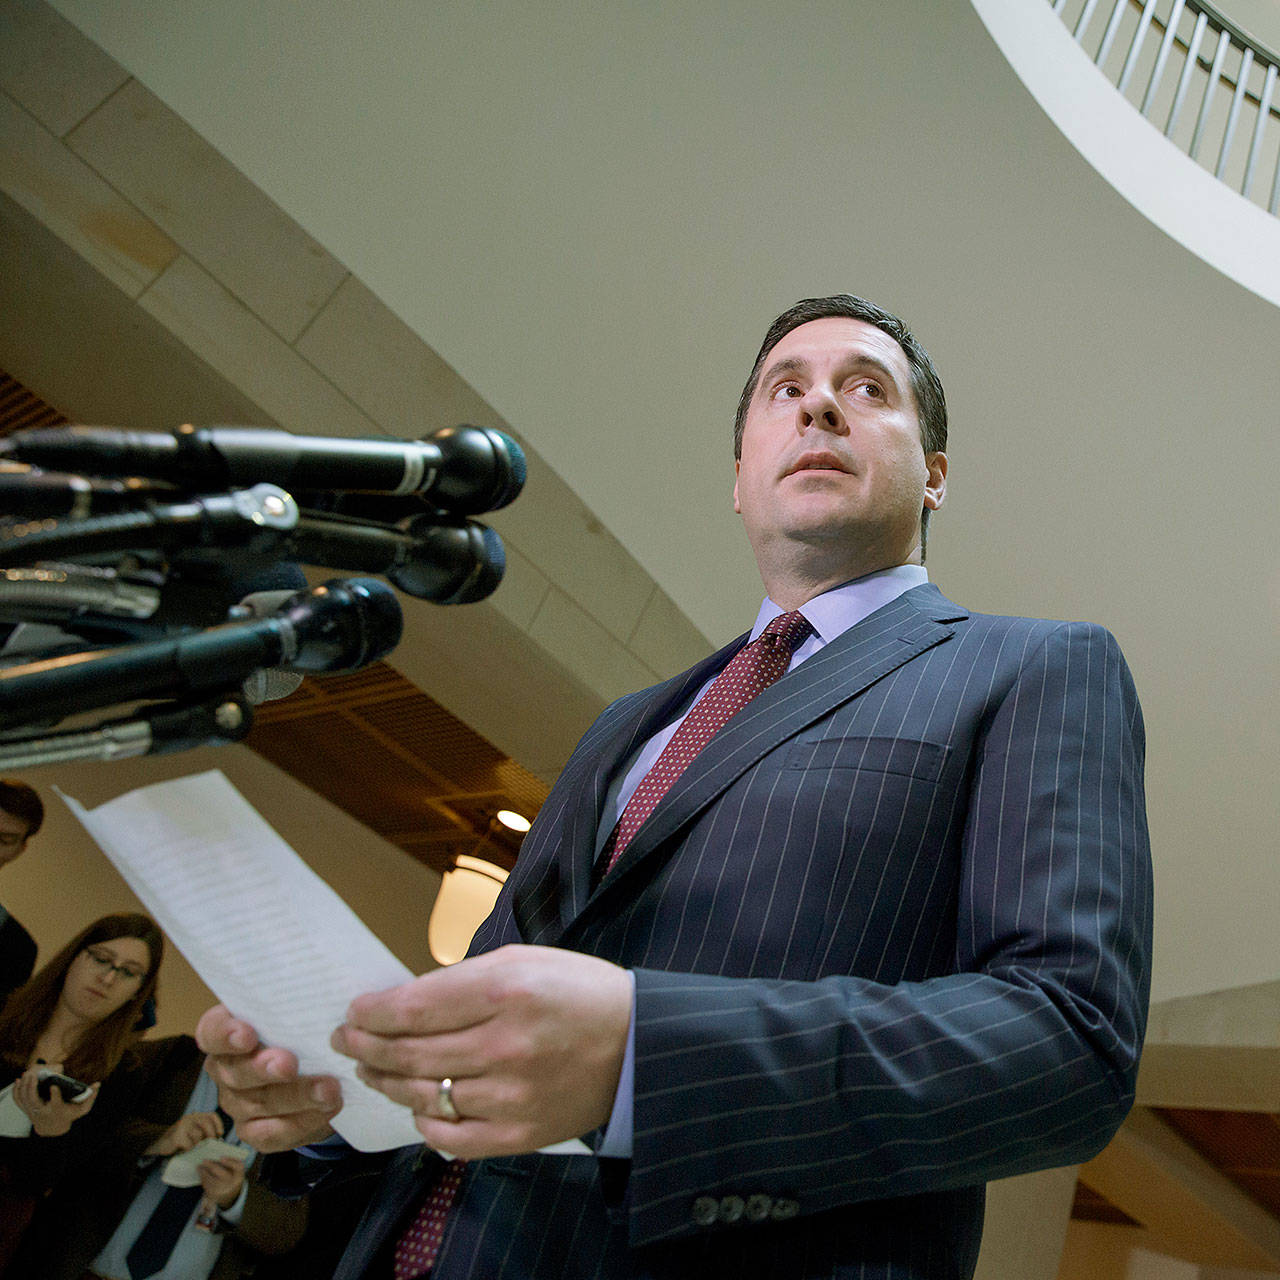 House Intelligence Committee Chairman Rep. Devin Nunes, R-Calif., gives reporterson Capitol Hill in Washington an update on Wednesday about the ongoing Russia investigation. (AP Photo/J. Scott Applewhite)